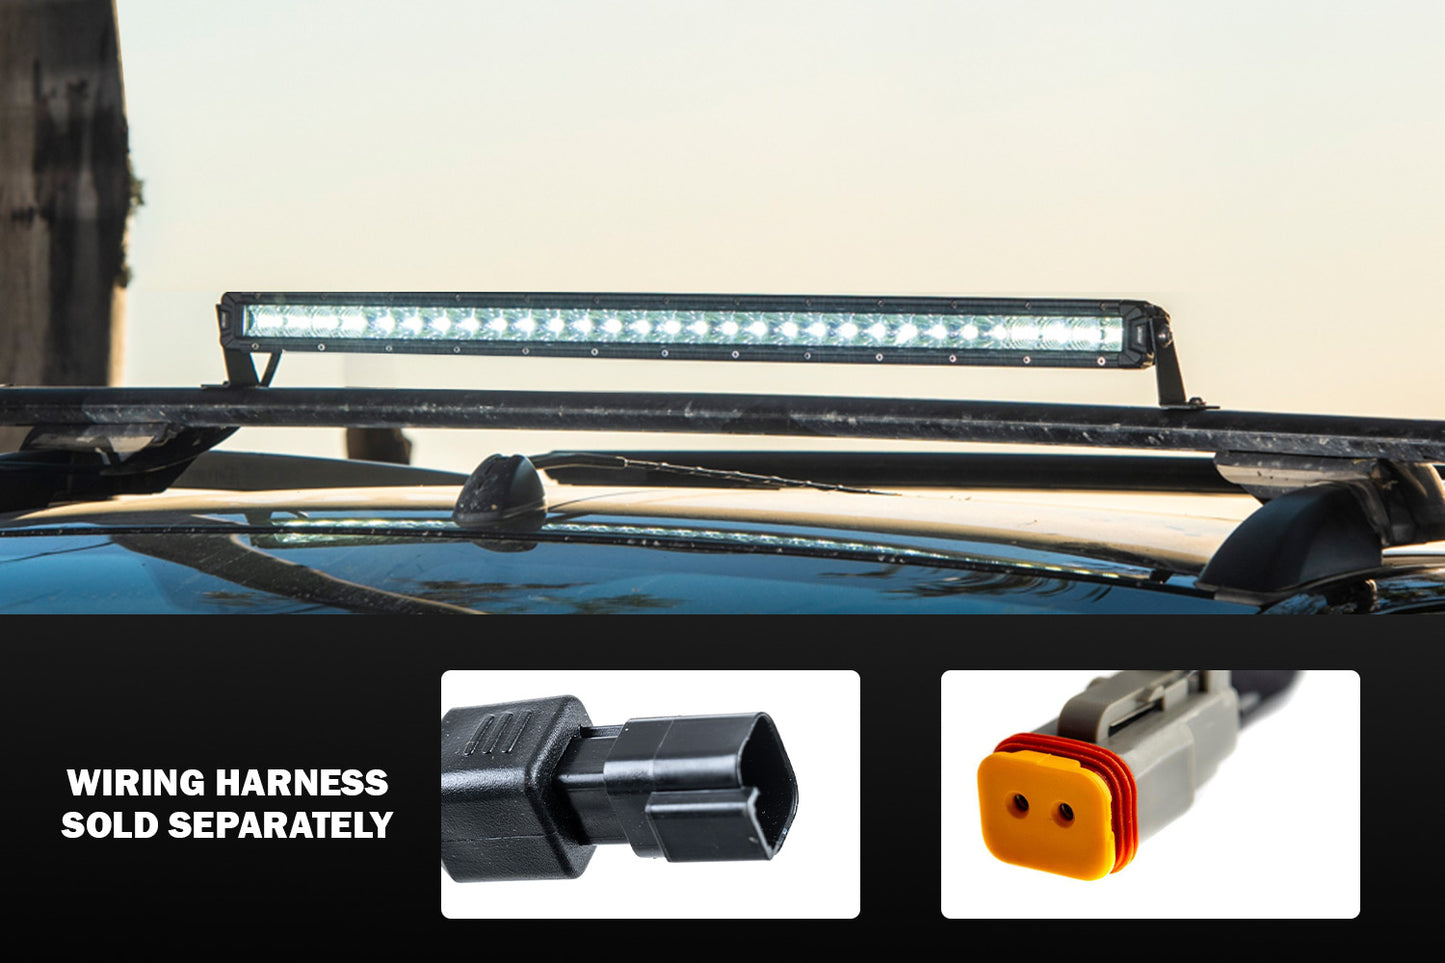 Kings 30" LETHAL MKIII Slim Line LED Light Bar | 1 Lux @ 474.8m | 8,534 Lumens | Fitted with OSRAM LEDs